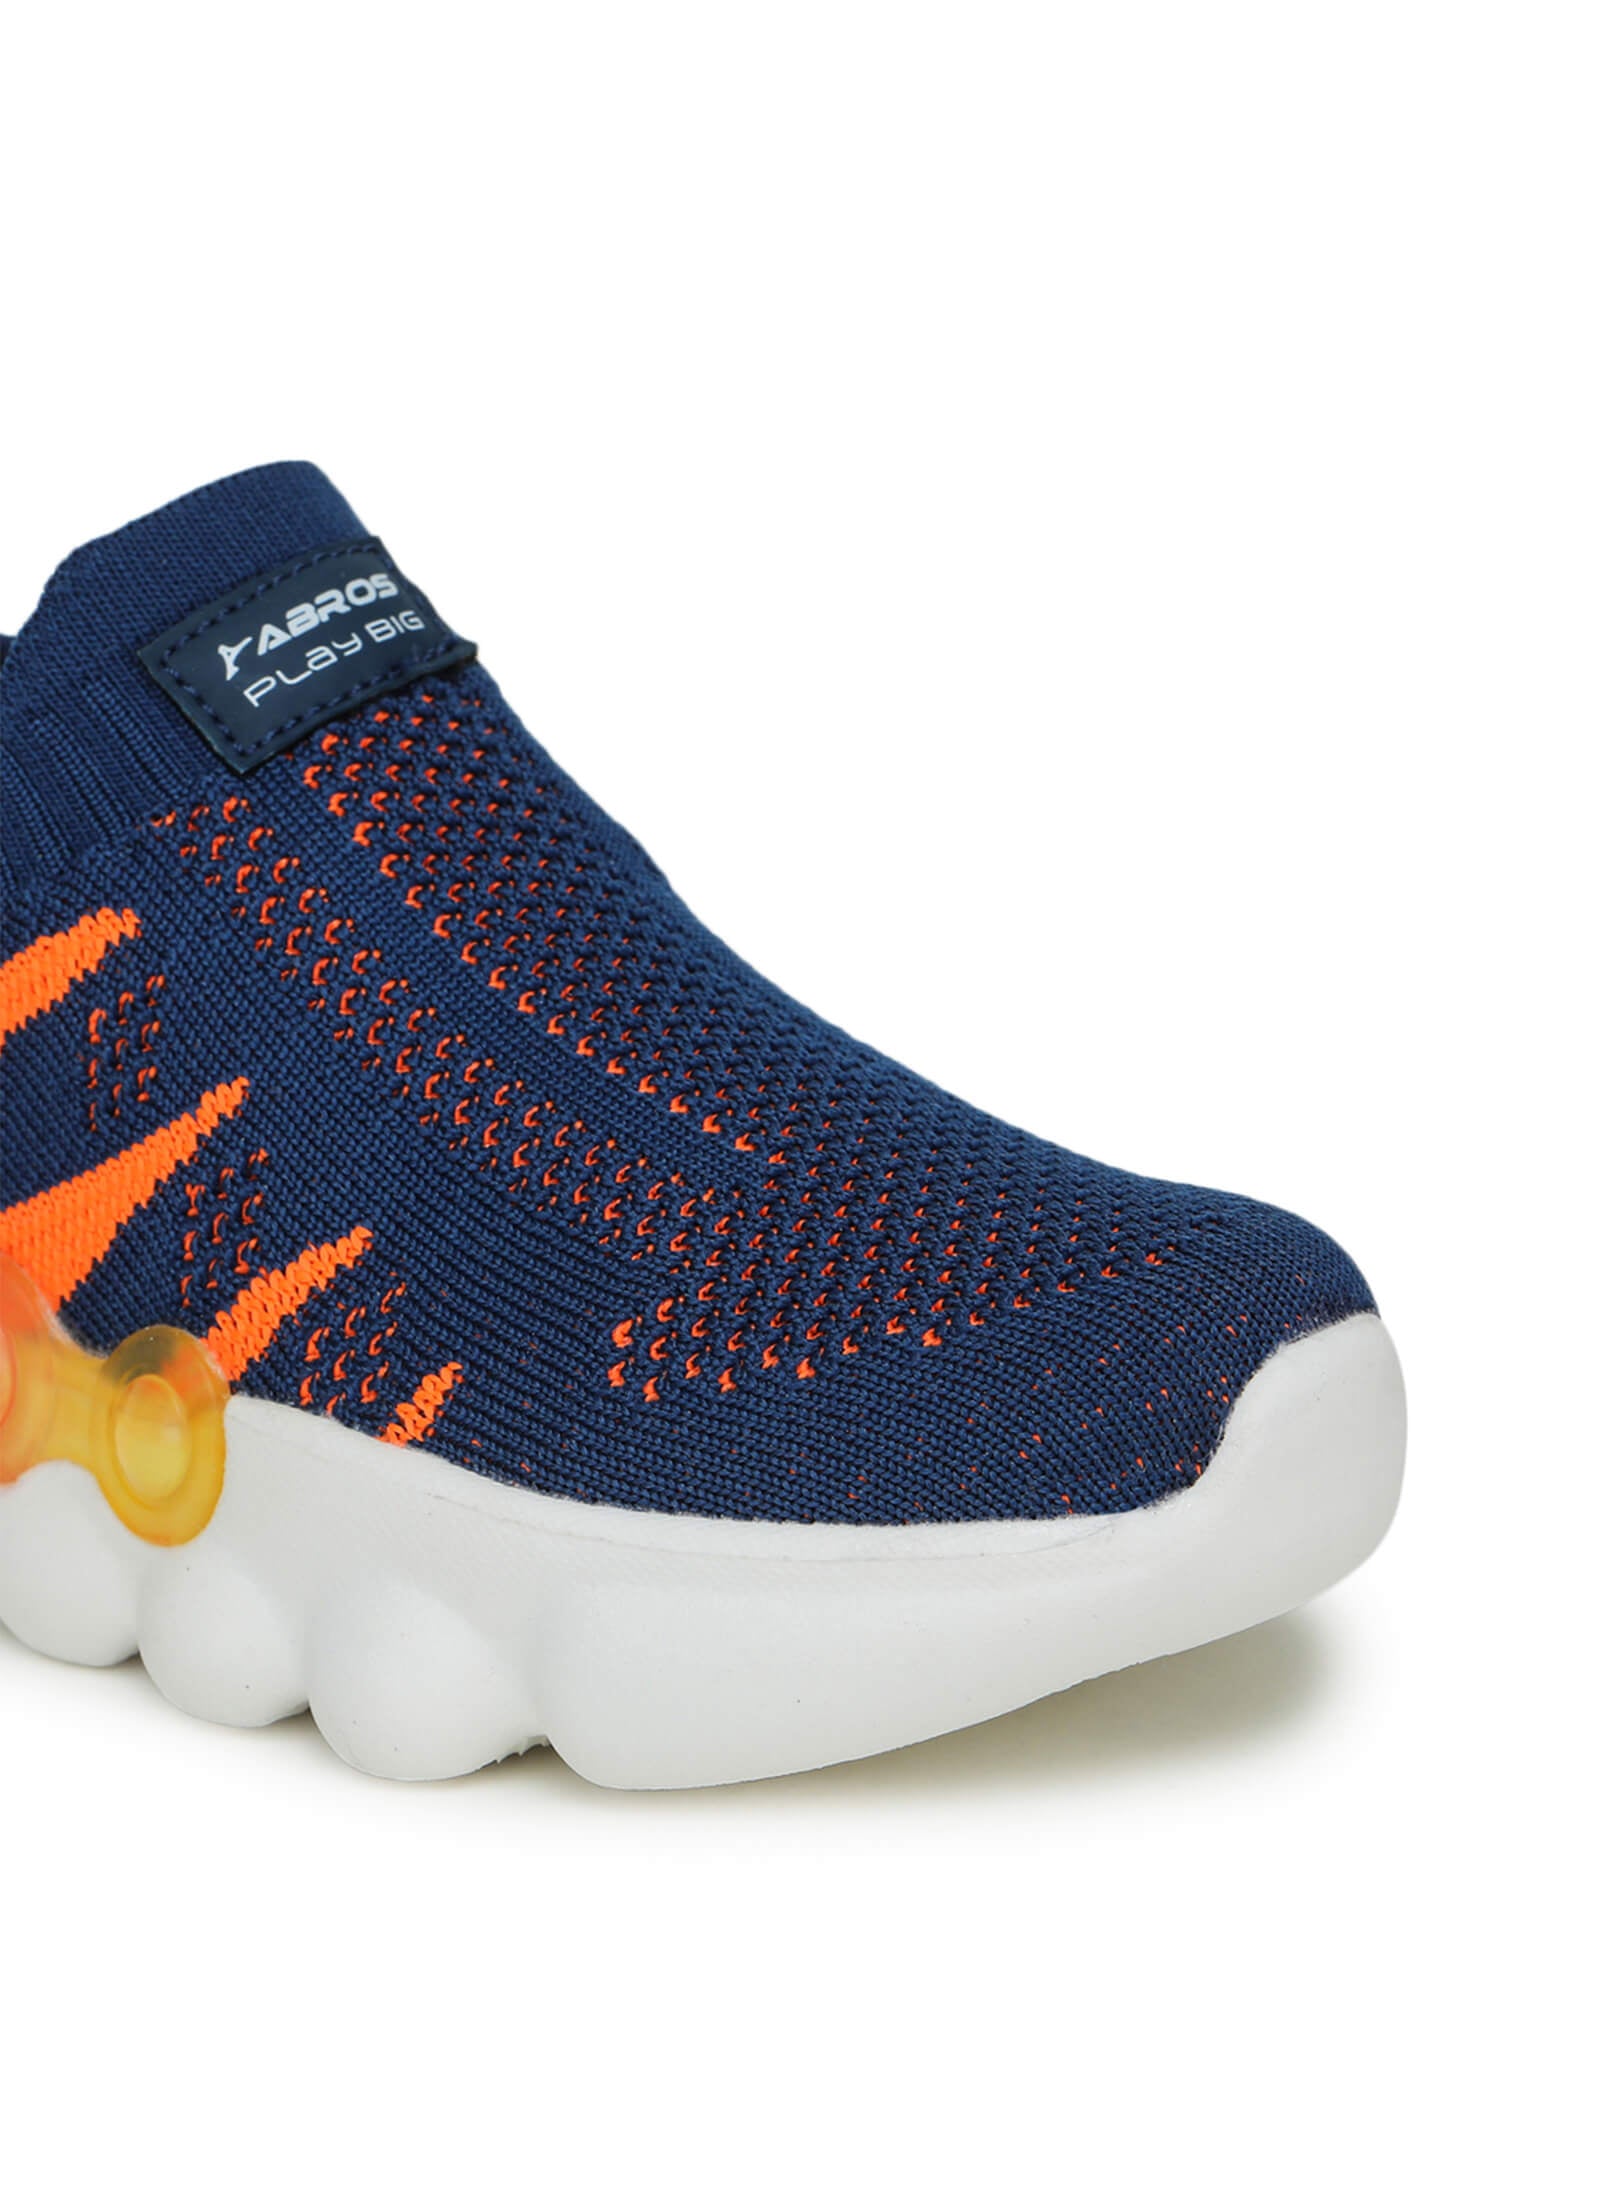 Run-N Sports Shoes for Kids